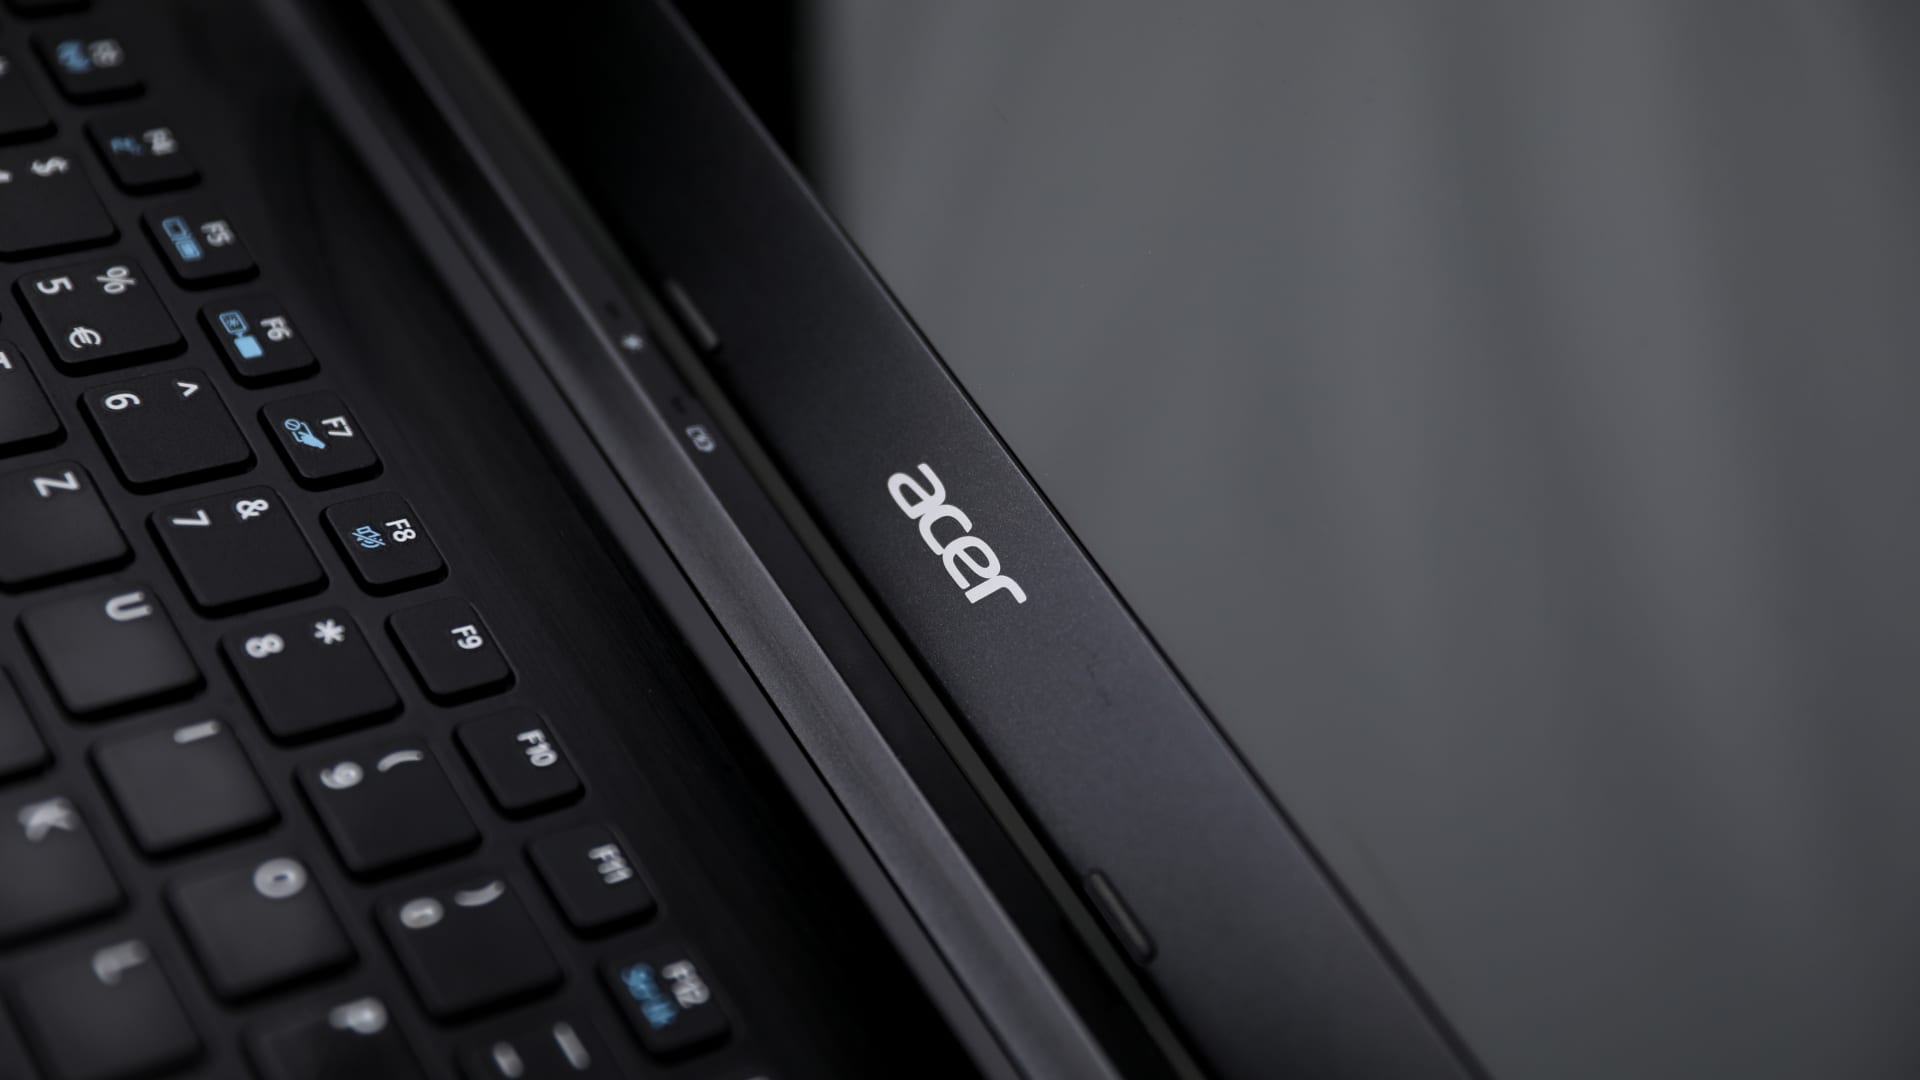 PC demand is back, says Acer CEO who sees robust growth